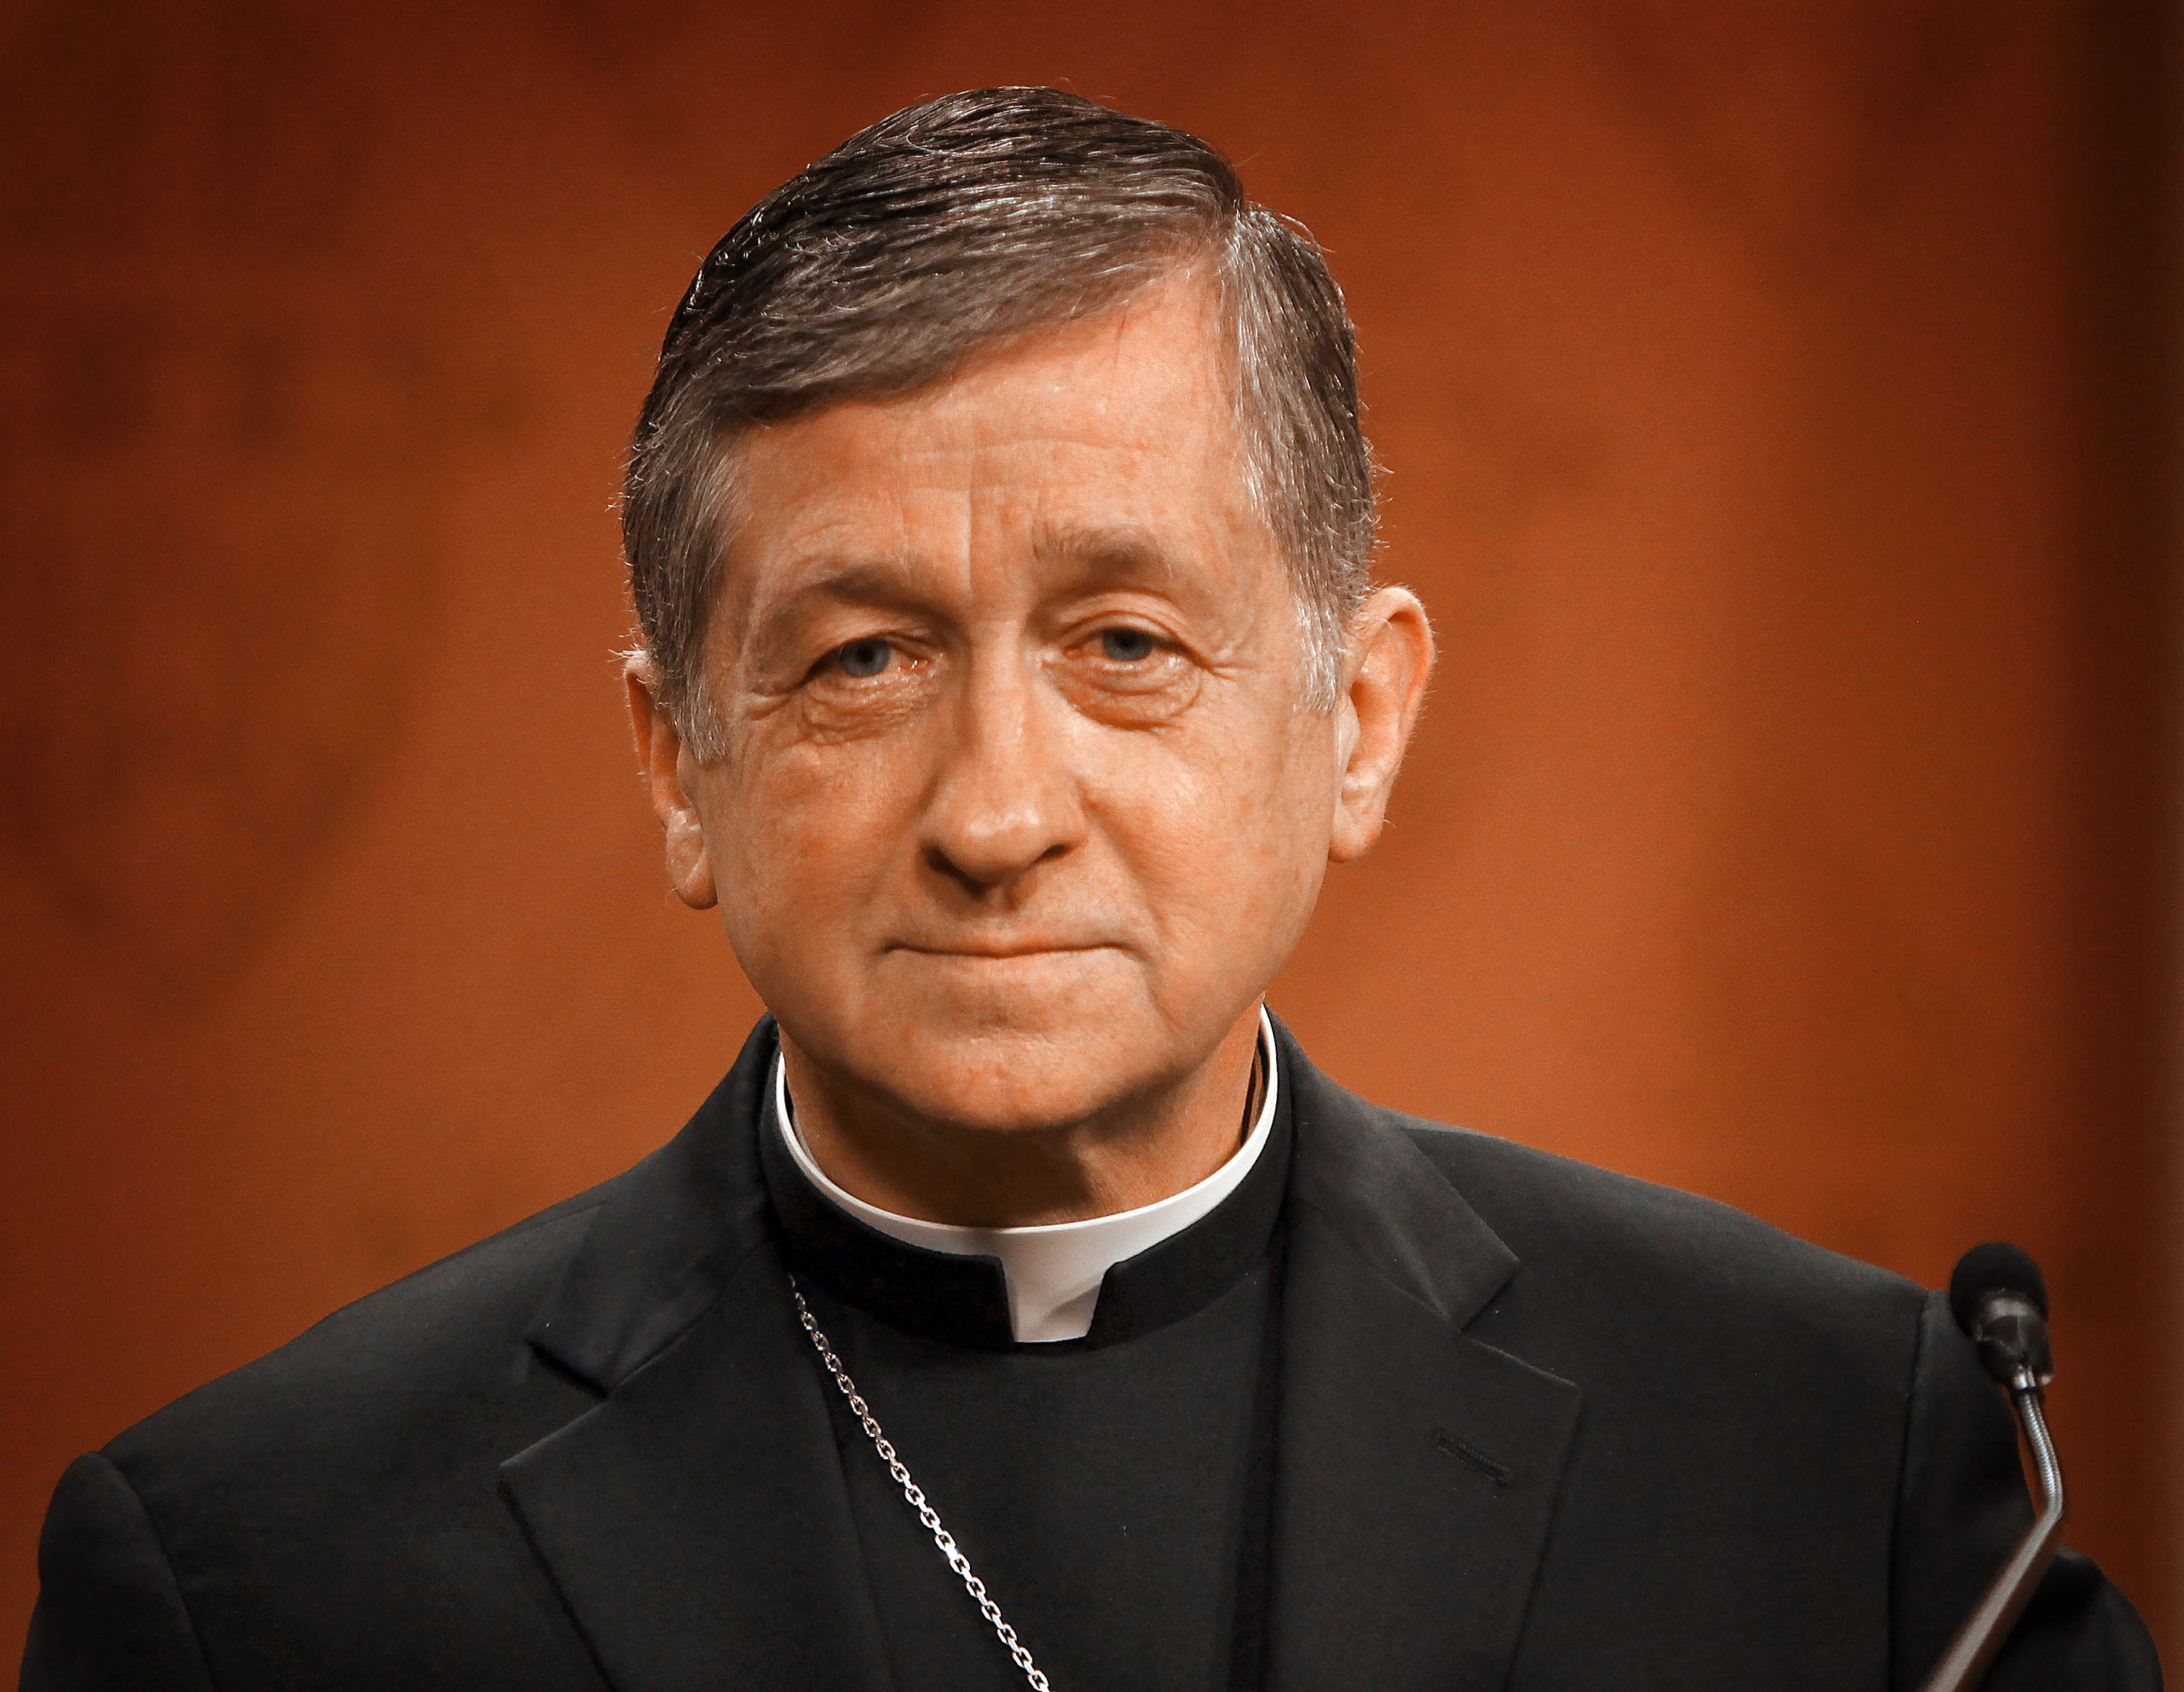 FAMILY REACT CUPICH